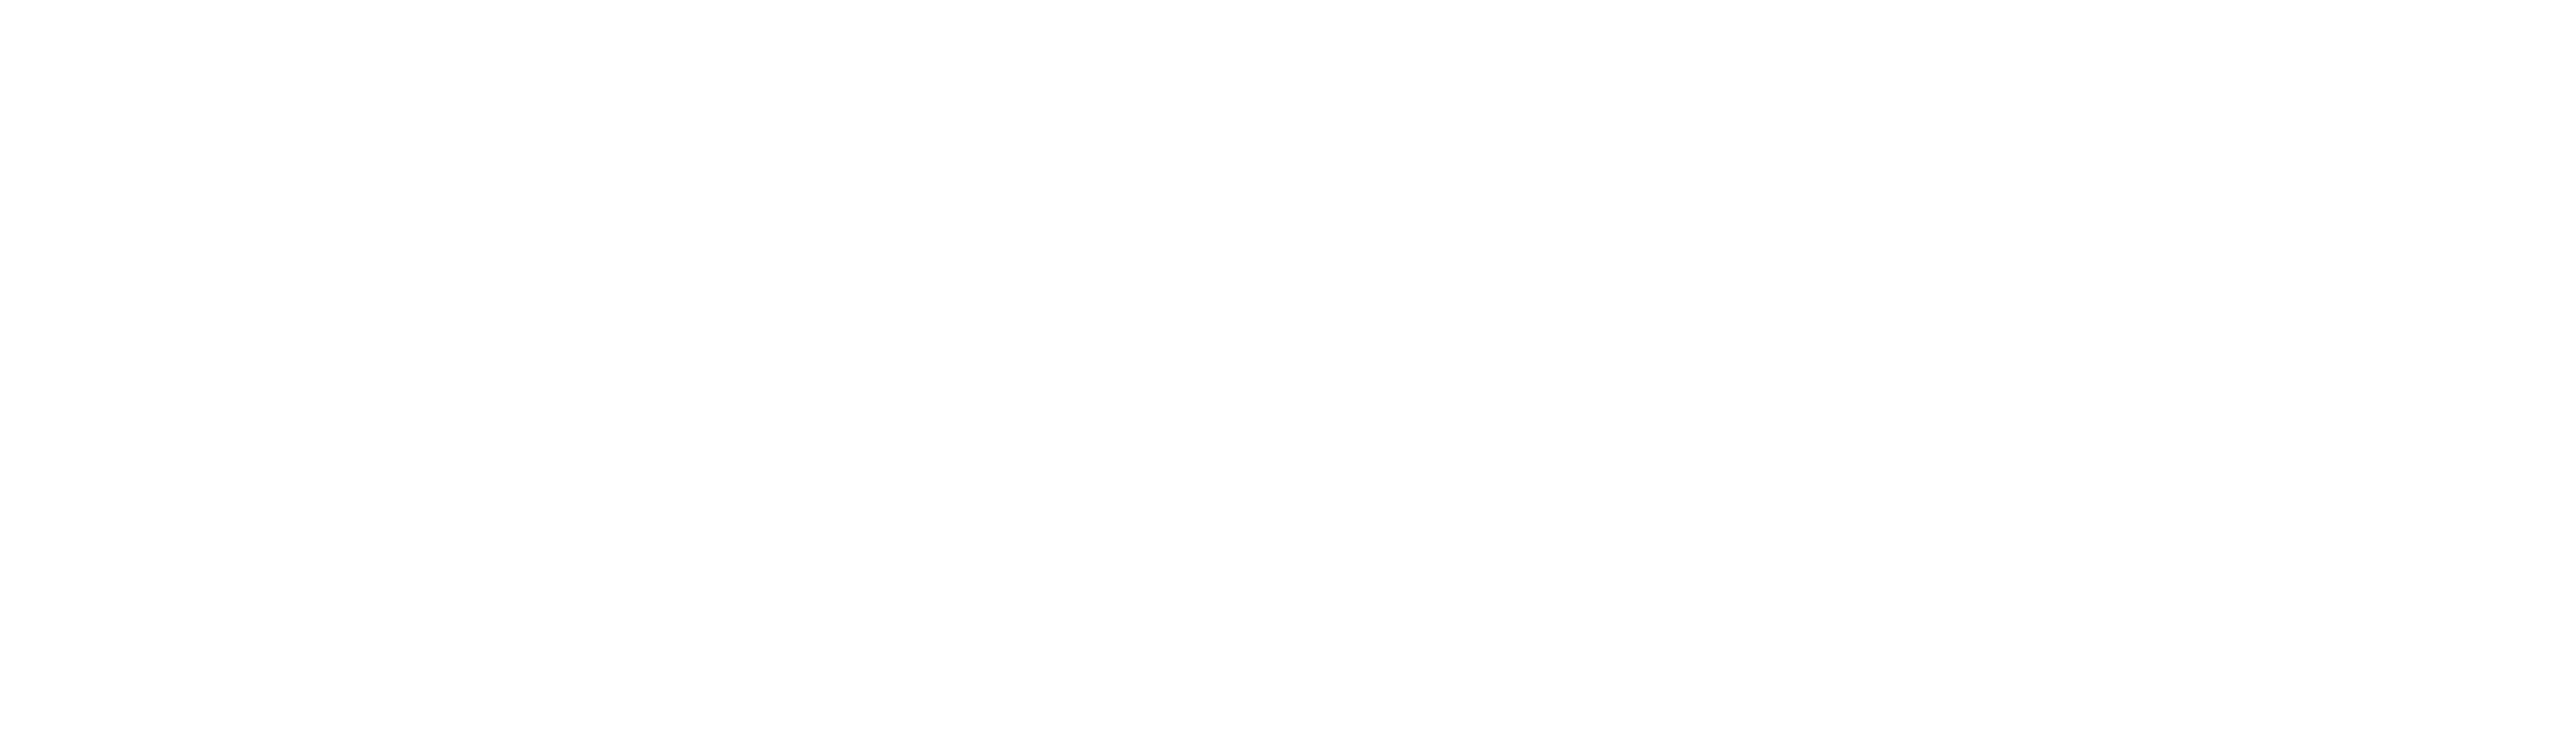 nearfield: Experience more in Bath, Bristol and Beyond